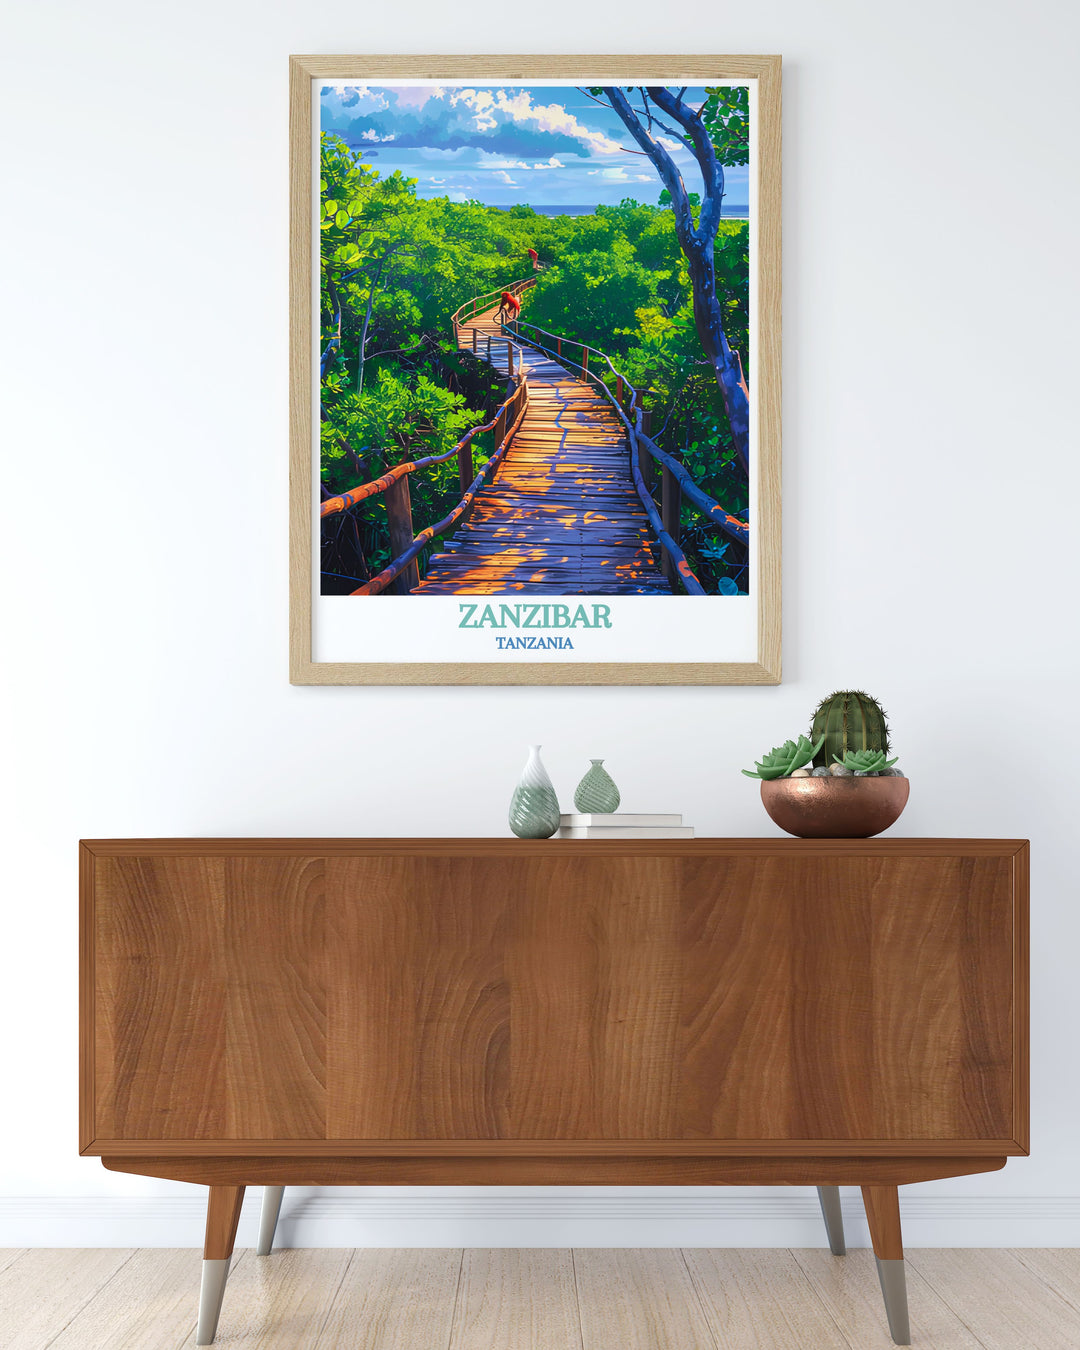 Modern Jozani Forest poster featuring a contemporary design of Zanzibars lush forest great for adding a stylish and nature inspired touch to your home decor with high quality prints that stand out in any room.